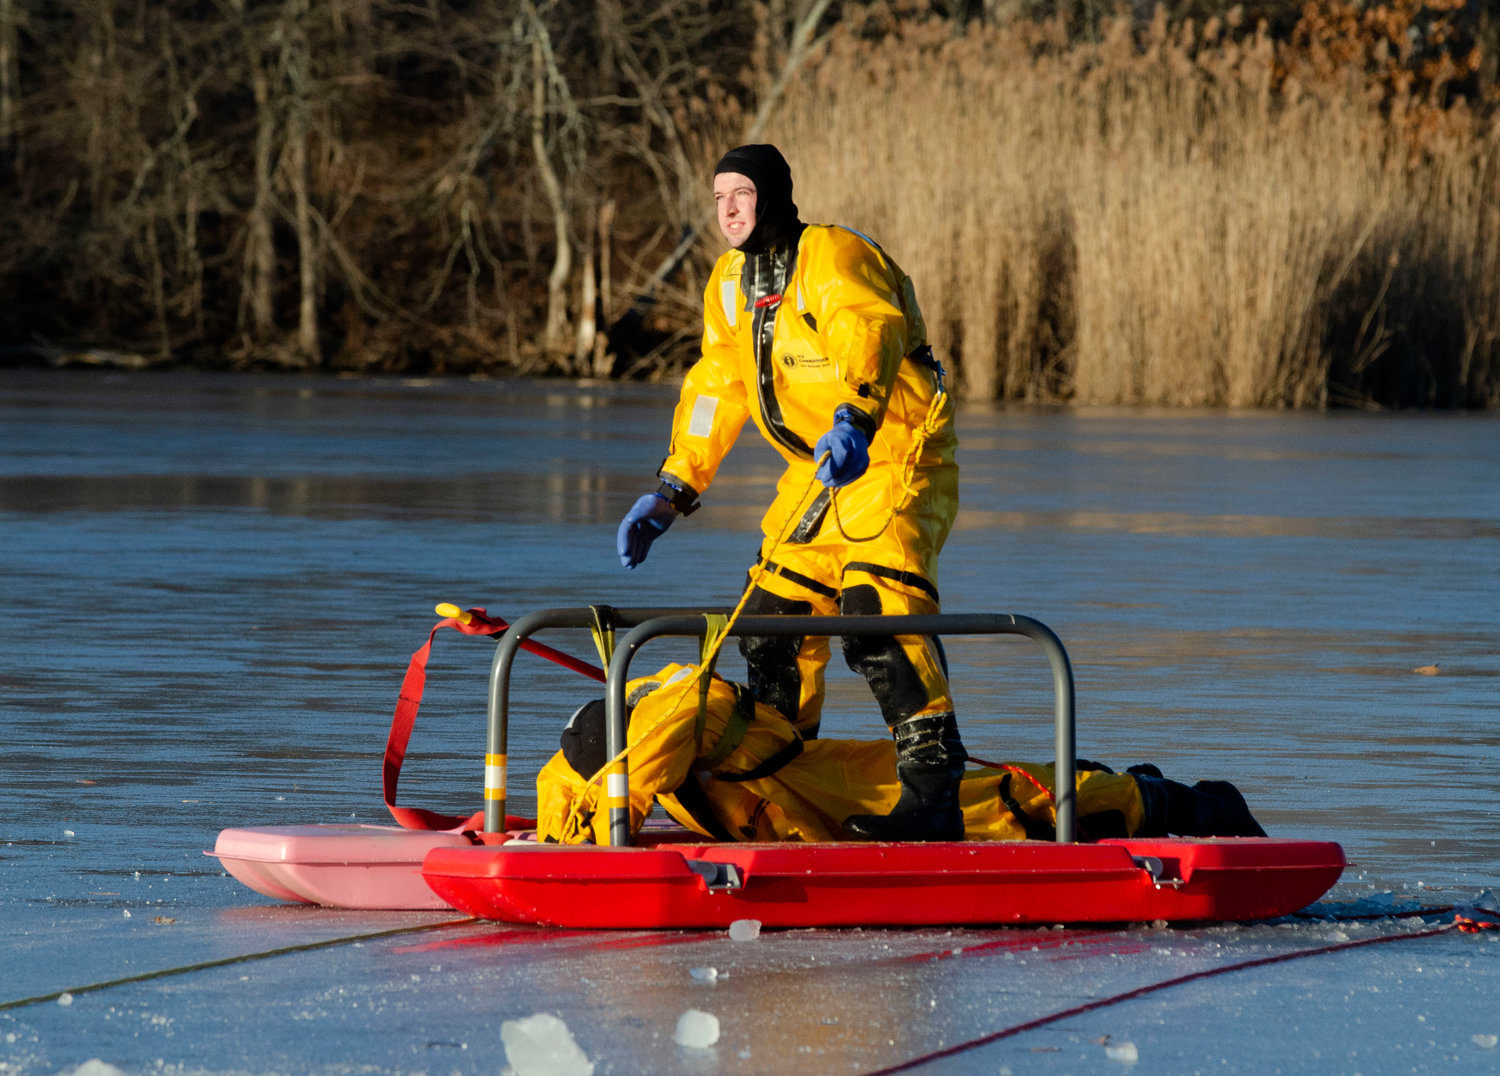 Barrington firefighter Pat Reihl pulls probationary firefighter Jared Pedro from the icy water at Brickyard Pond during an ice rescue training session on Friday afternoon.